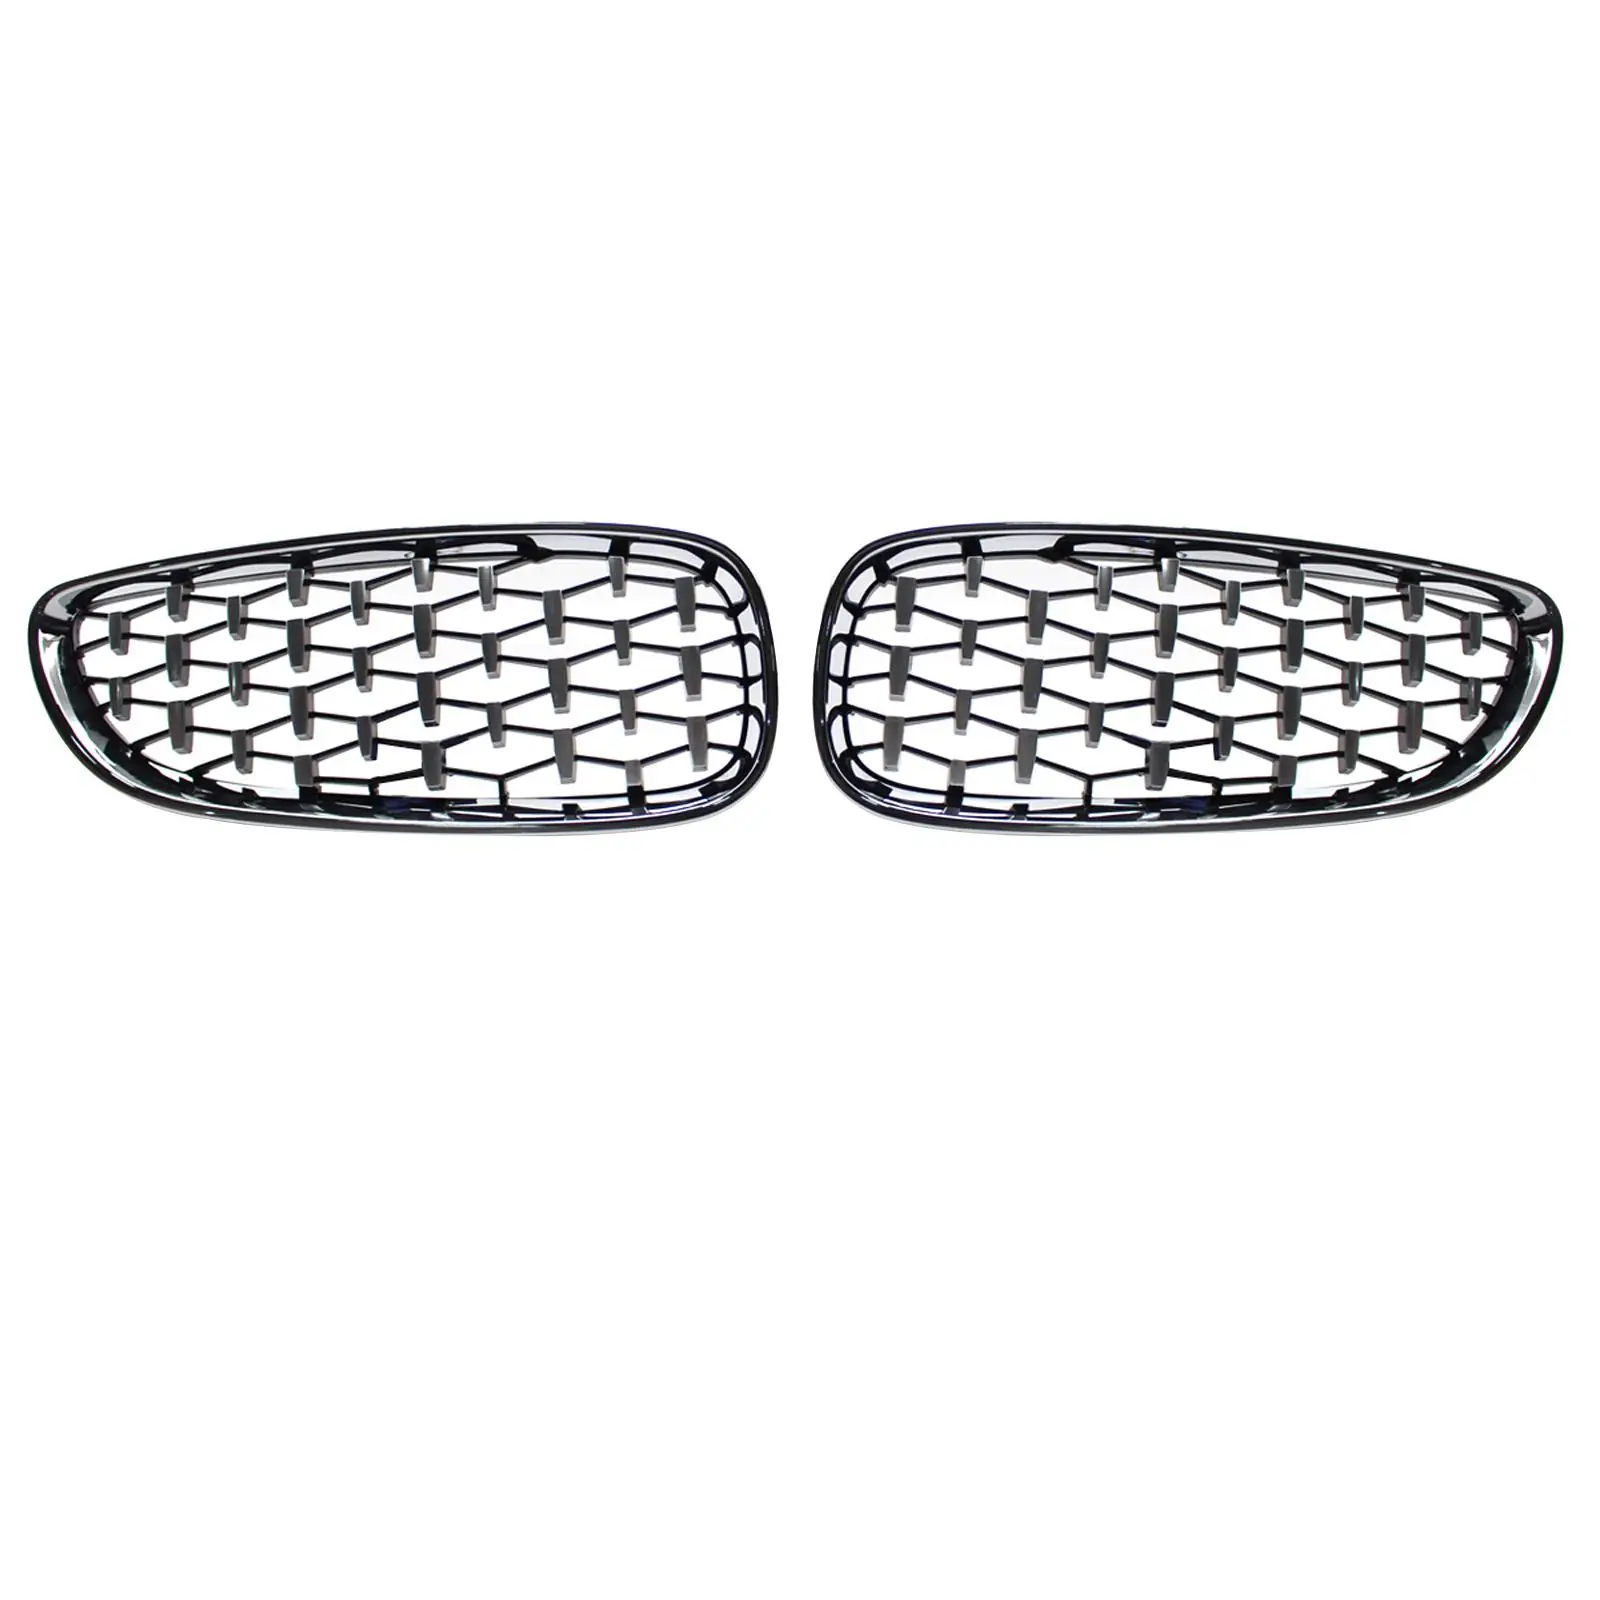 2x 51137181547 Air Inlet cover Front Kidney Grille for Z4 E89 Automobile